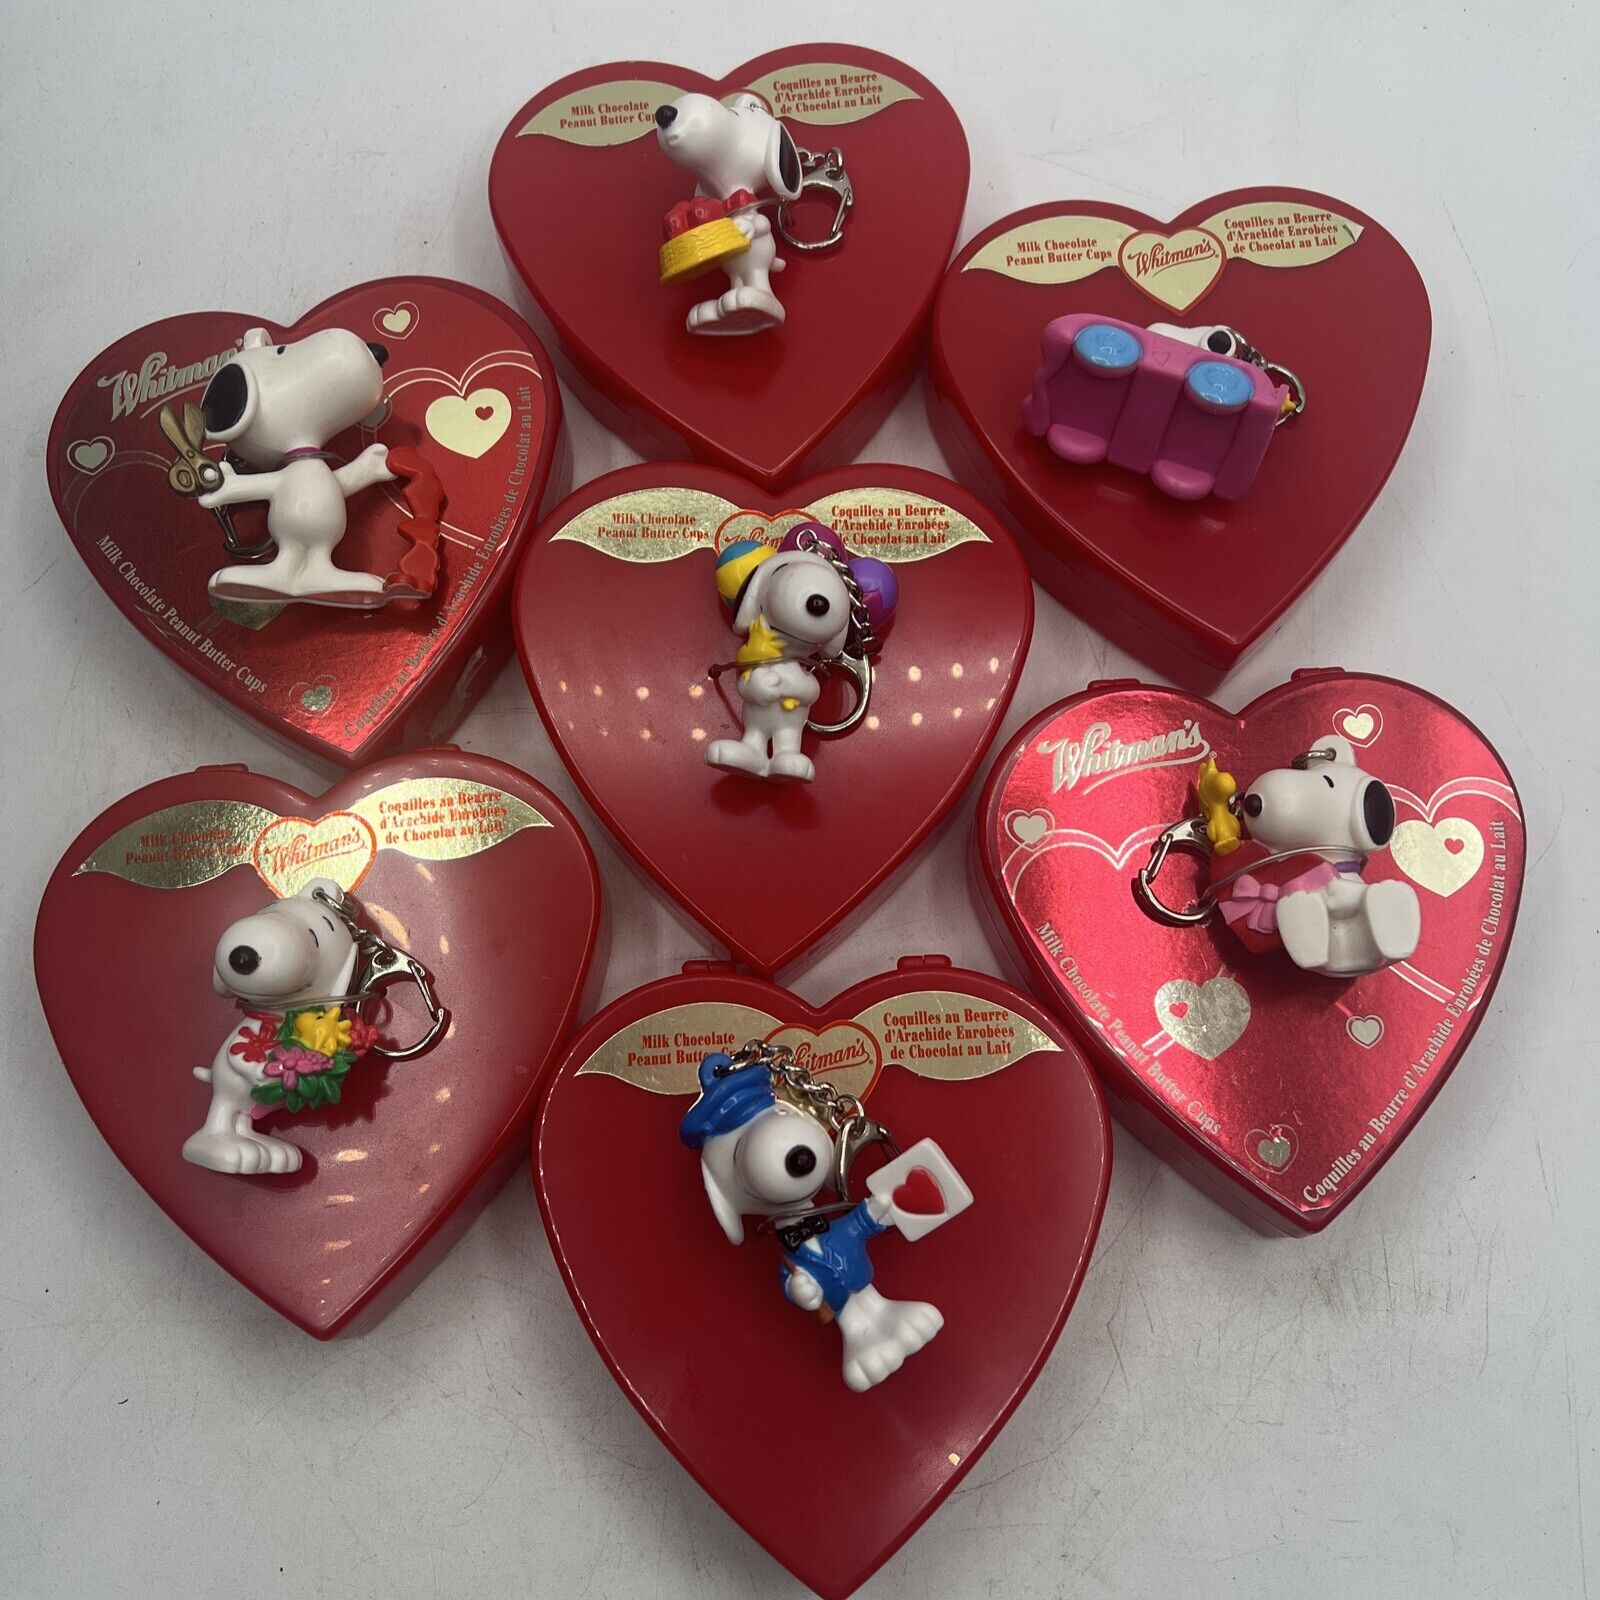 Peanuts Snoopy Whitman\'s Valentine Key Chains Attached to Plastic Heart Lot of 7